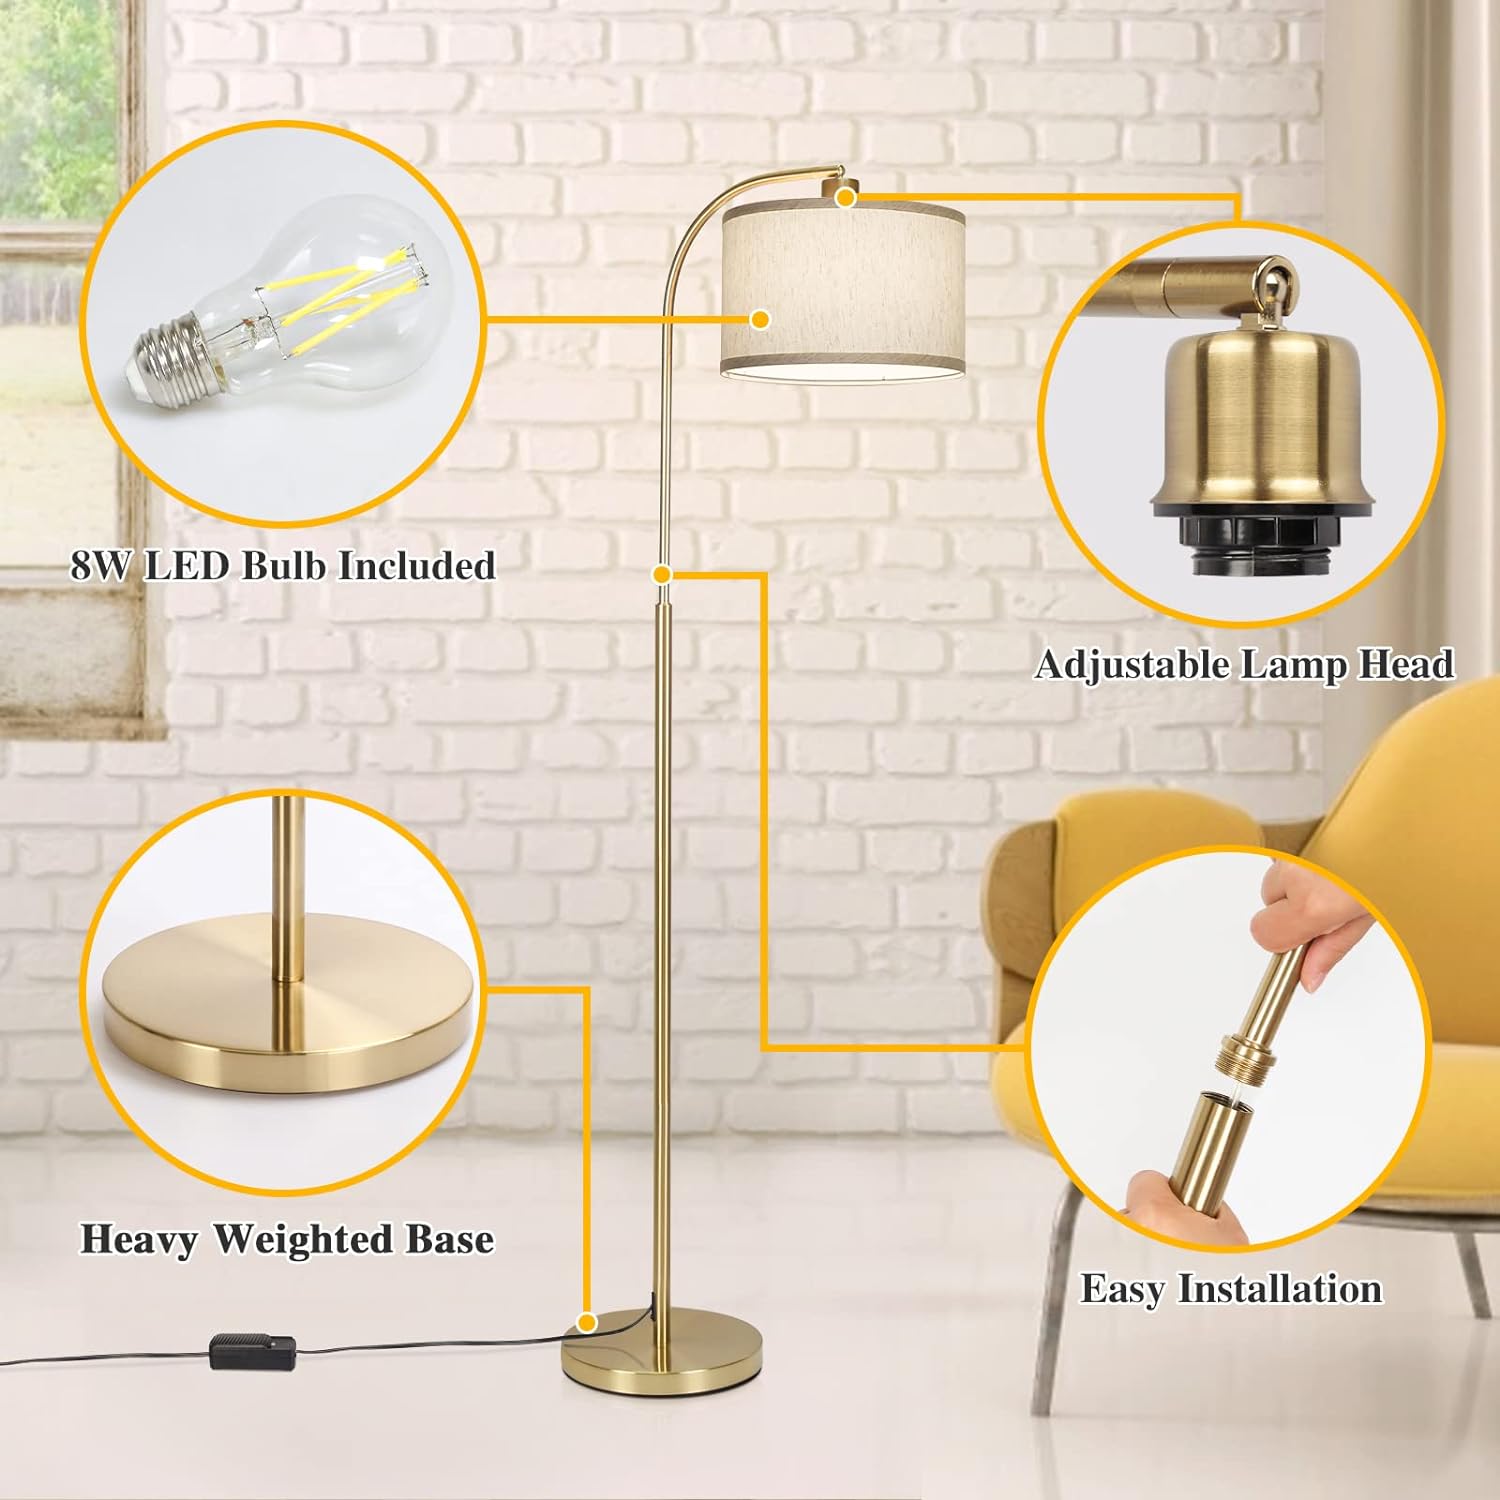 Boncoo LED Floor Lamp Fully Dimmable Modern Standing Lamp Arc Floor Lamp with Adjustable Drum Shade, Golden Tall Pole Reading Lamp Cor